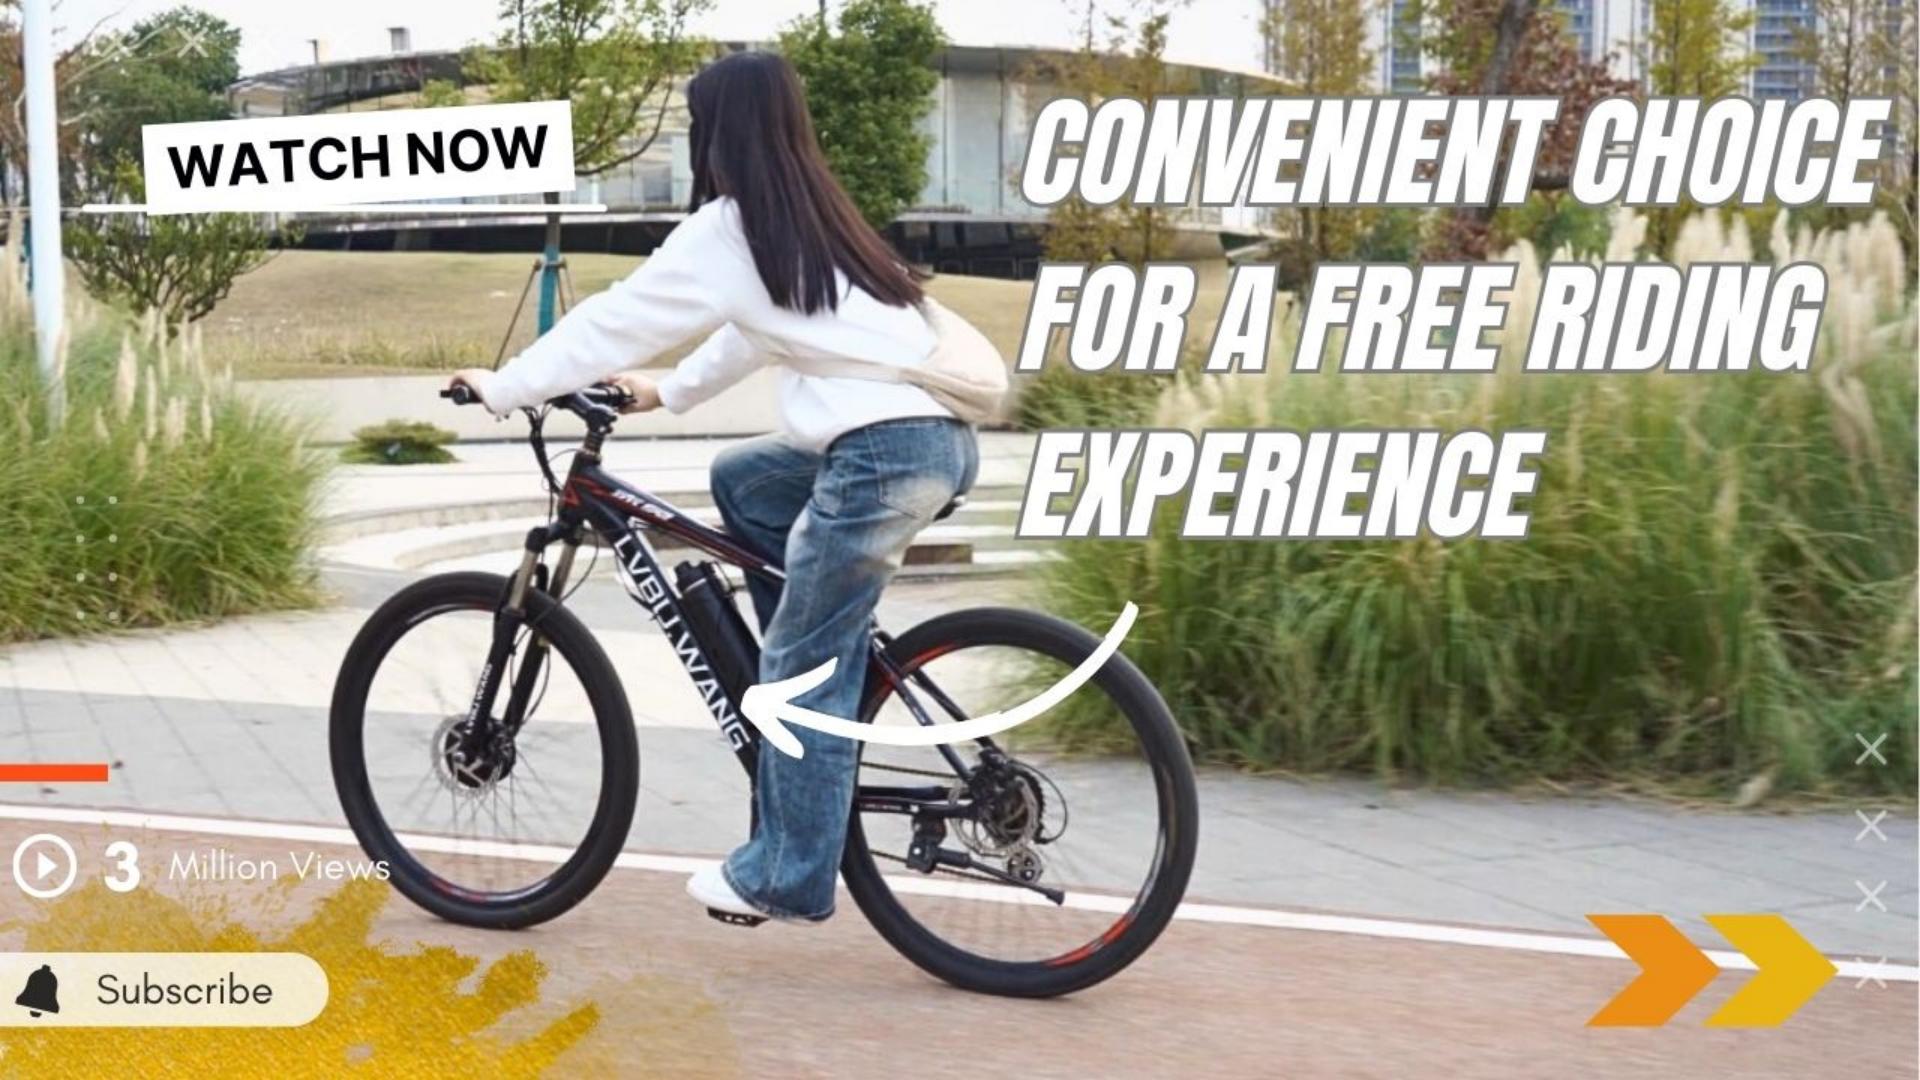 Lvbu Bottle Battery Ebike Kit// Convenient Choice for a Free Riding Experience